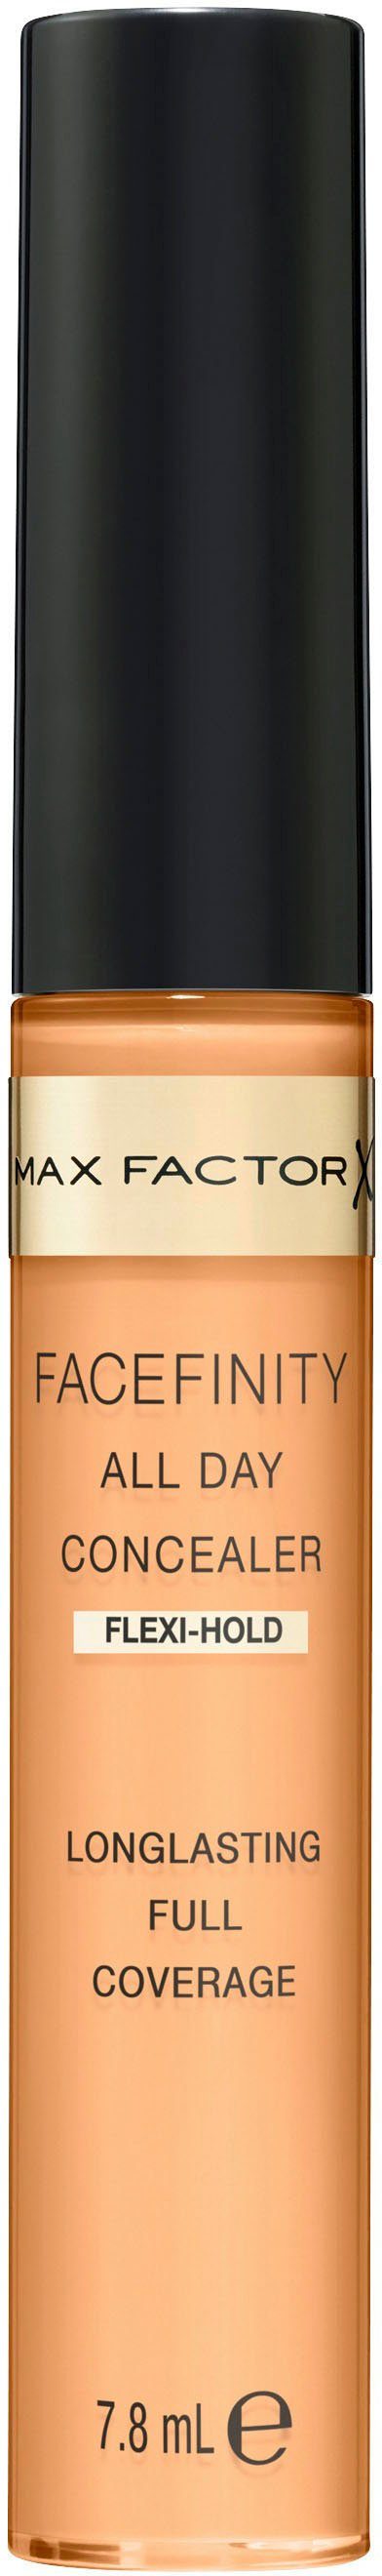 MAX FACTOR Concealer 70 All Day Flawless FACEFINITY